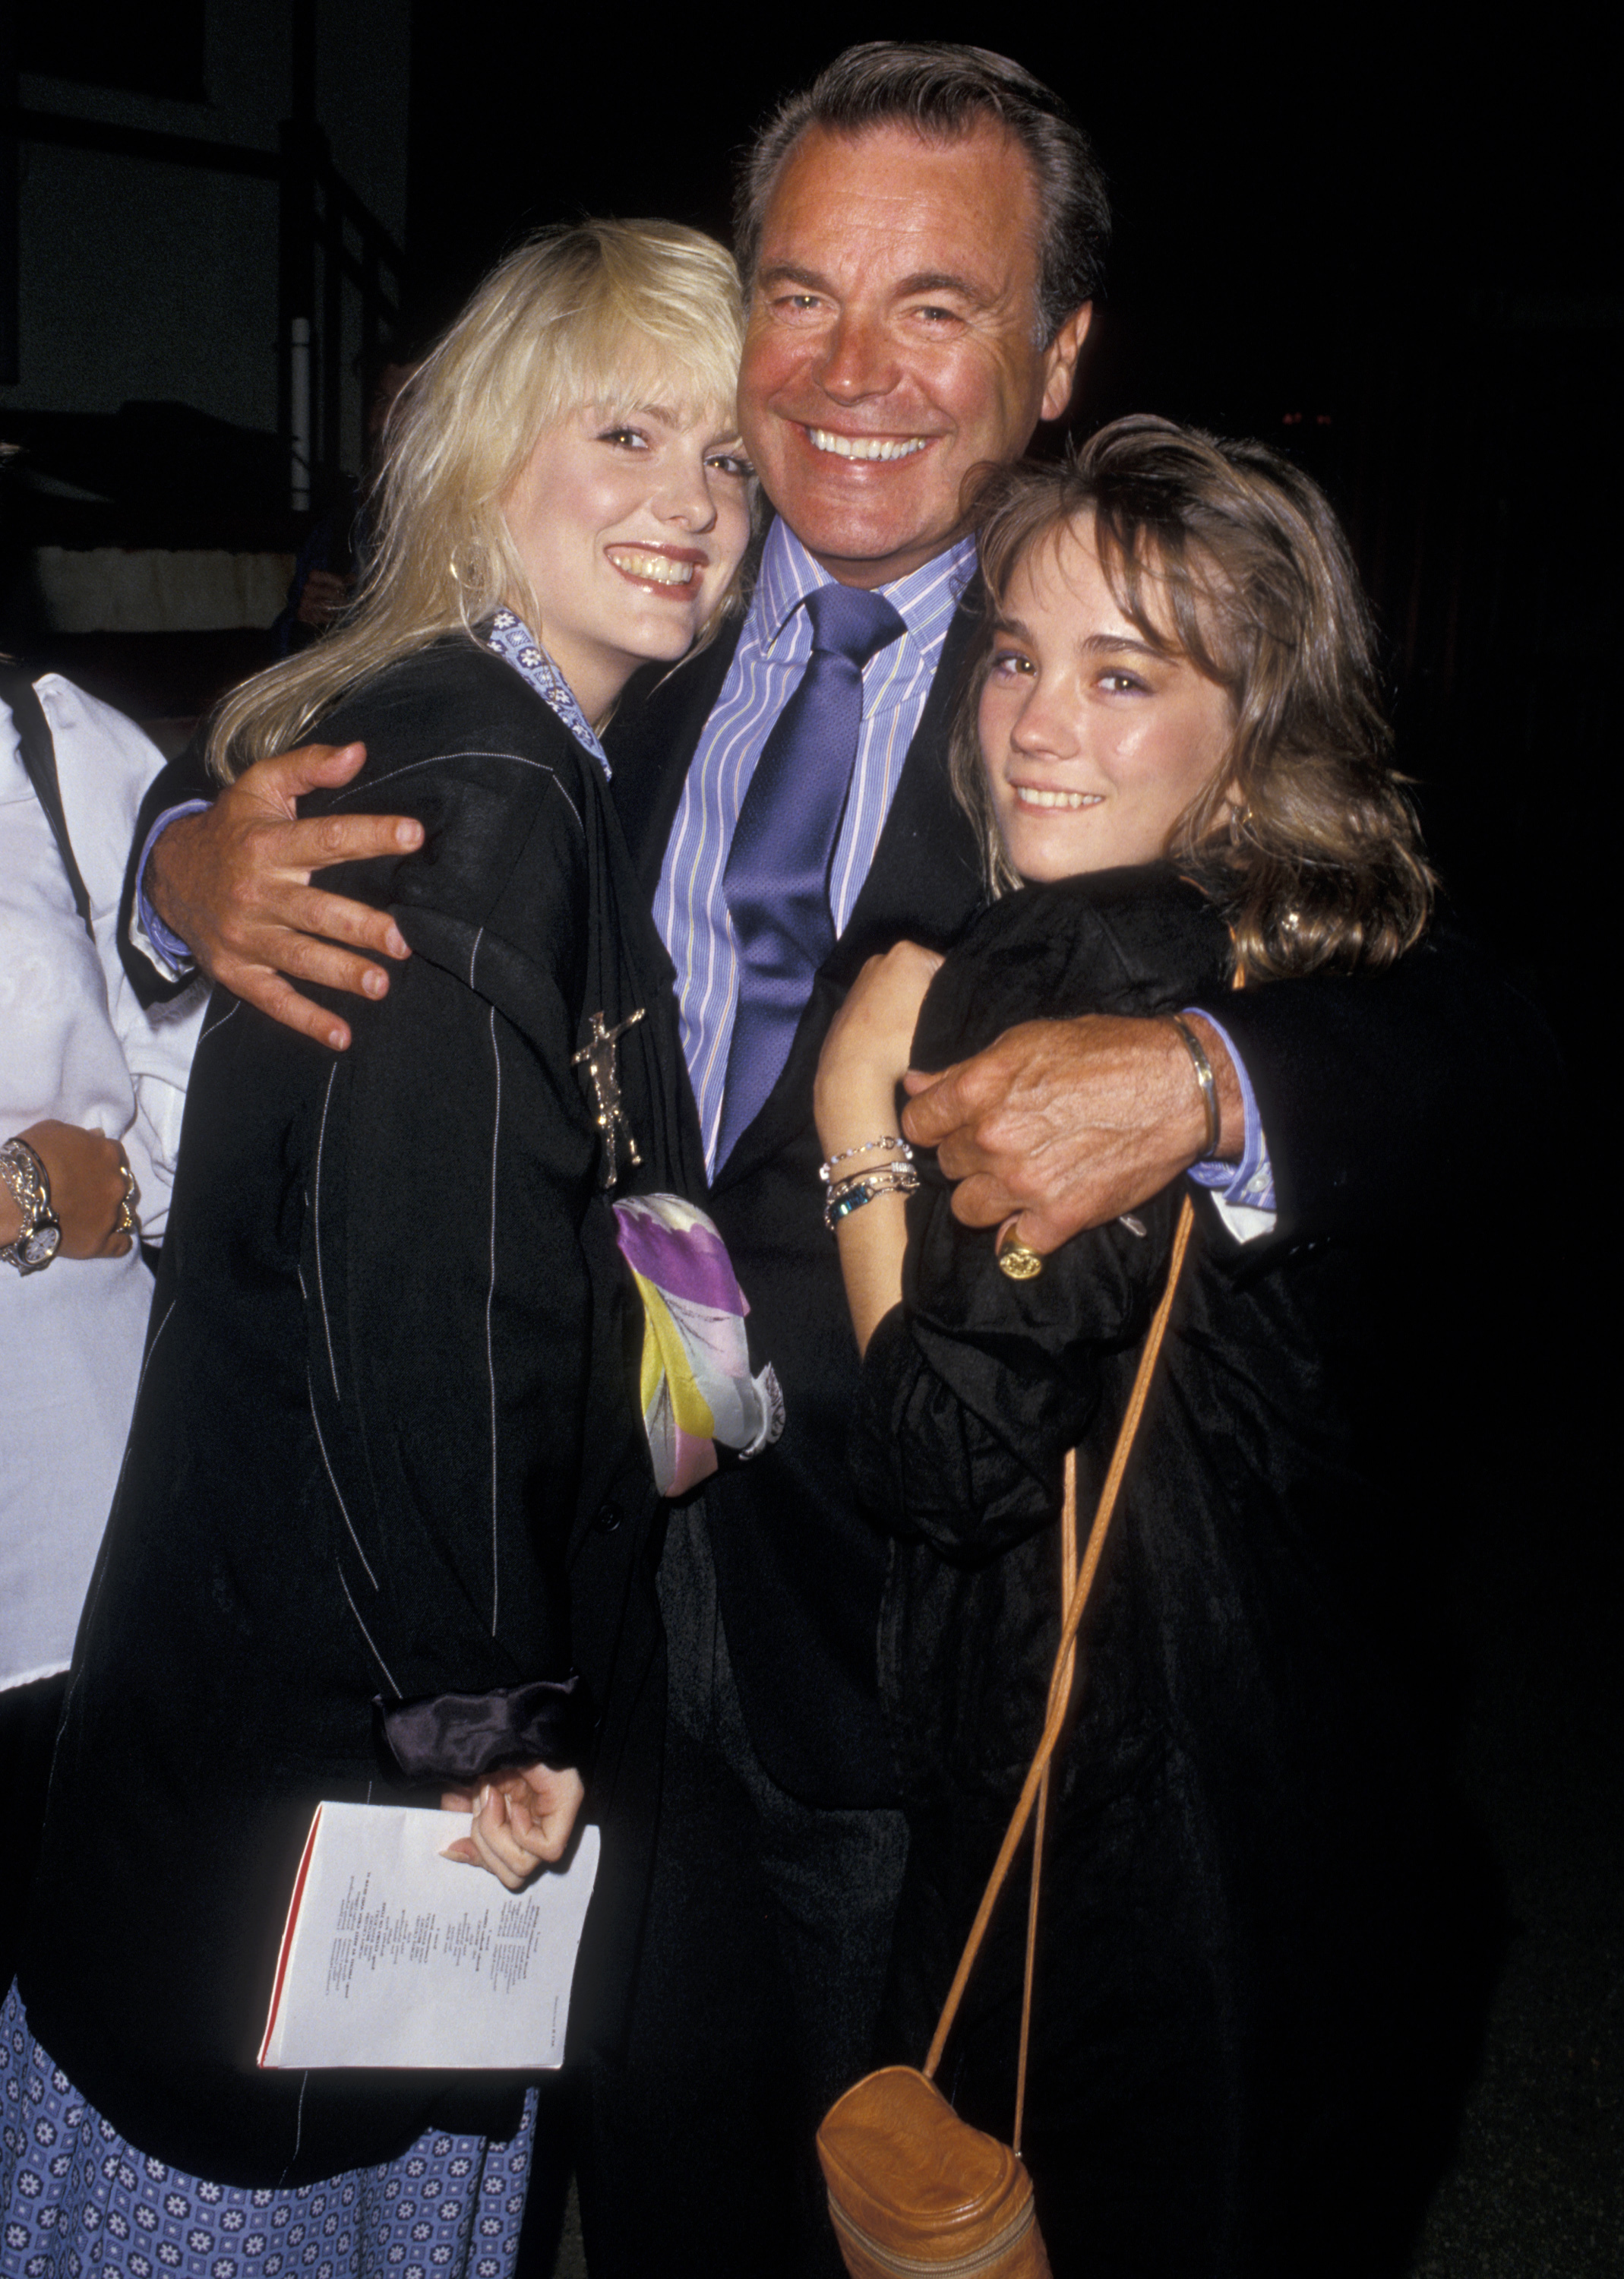 Katie Wagner, Robert Wagner and Natasha Wagner during Performance of "Caberet" on May 9, 1987 at Wadsworth Theater in Los Angeles, California. | Source: Getty Images